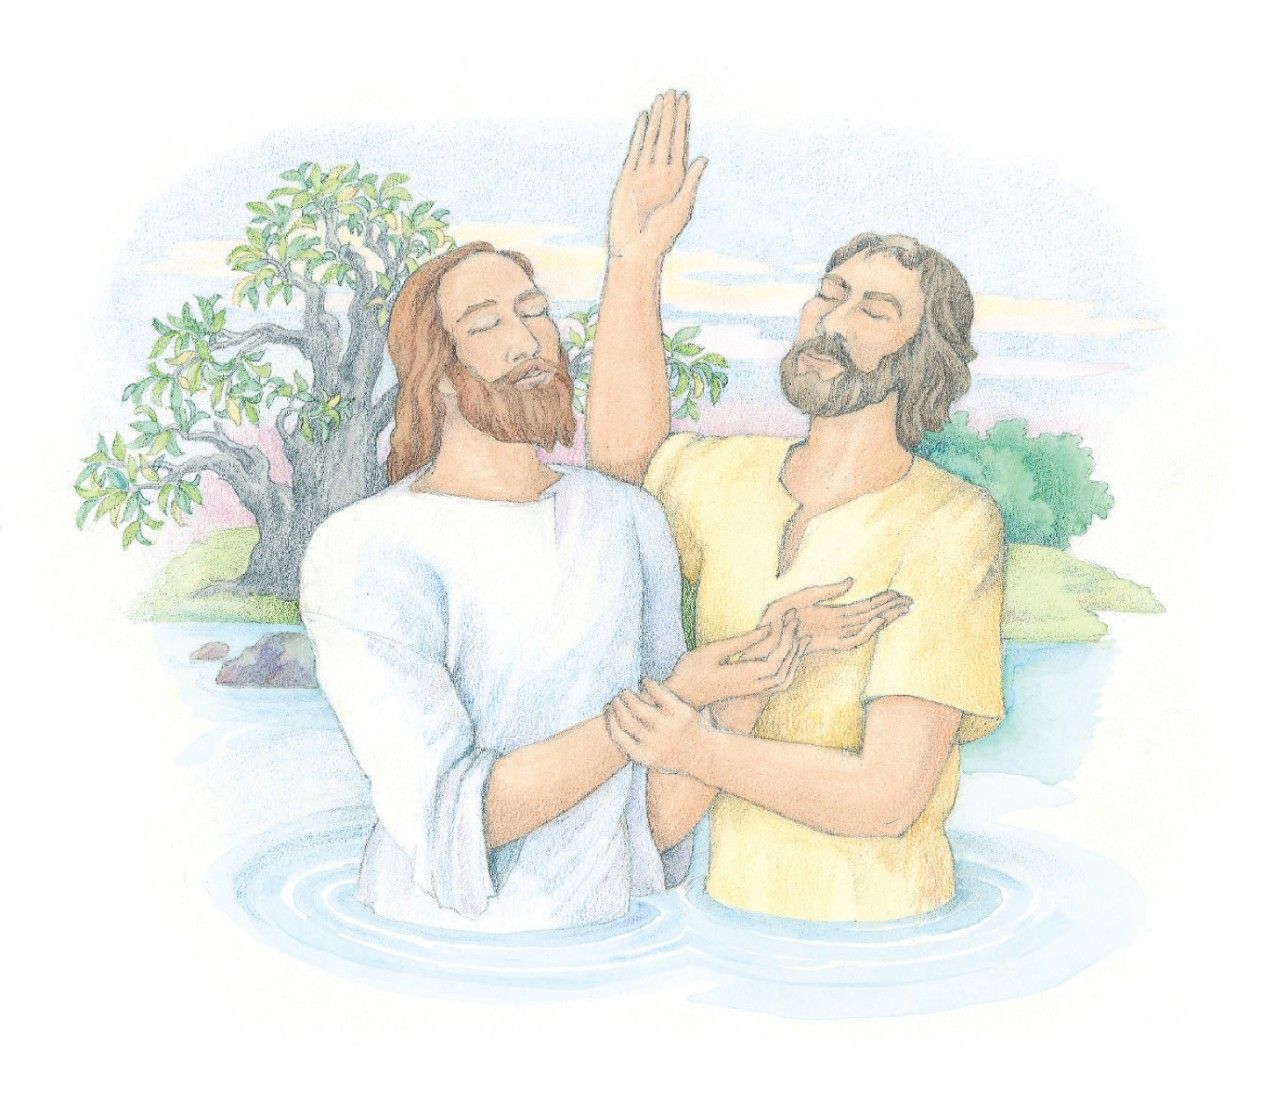 Jesus being baptized by John the Baptist. From the Children’s Songbook, page 100, “Baptism”; watercolor illustration by Phyllis Luch.